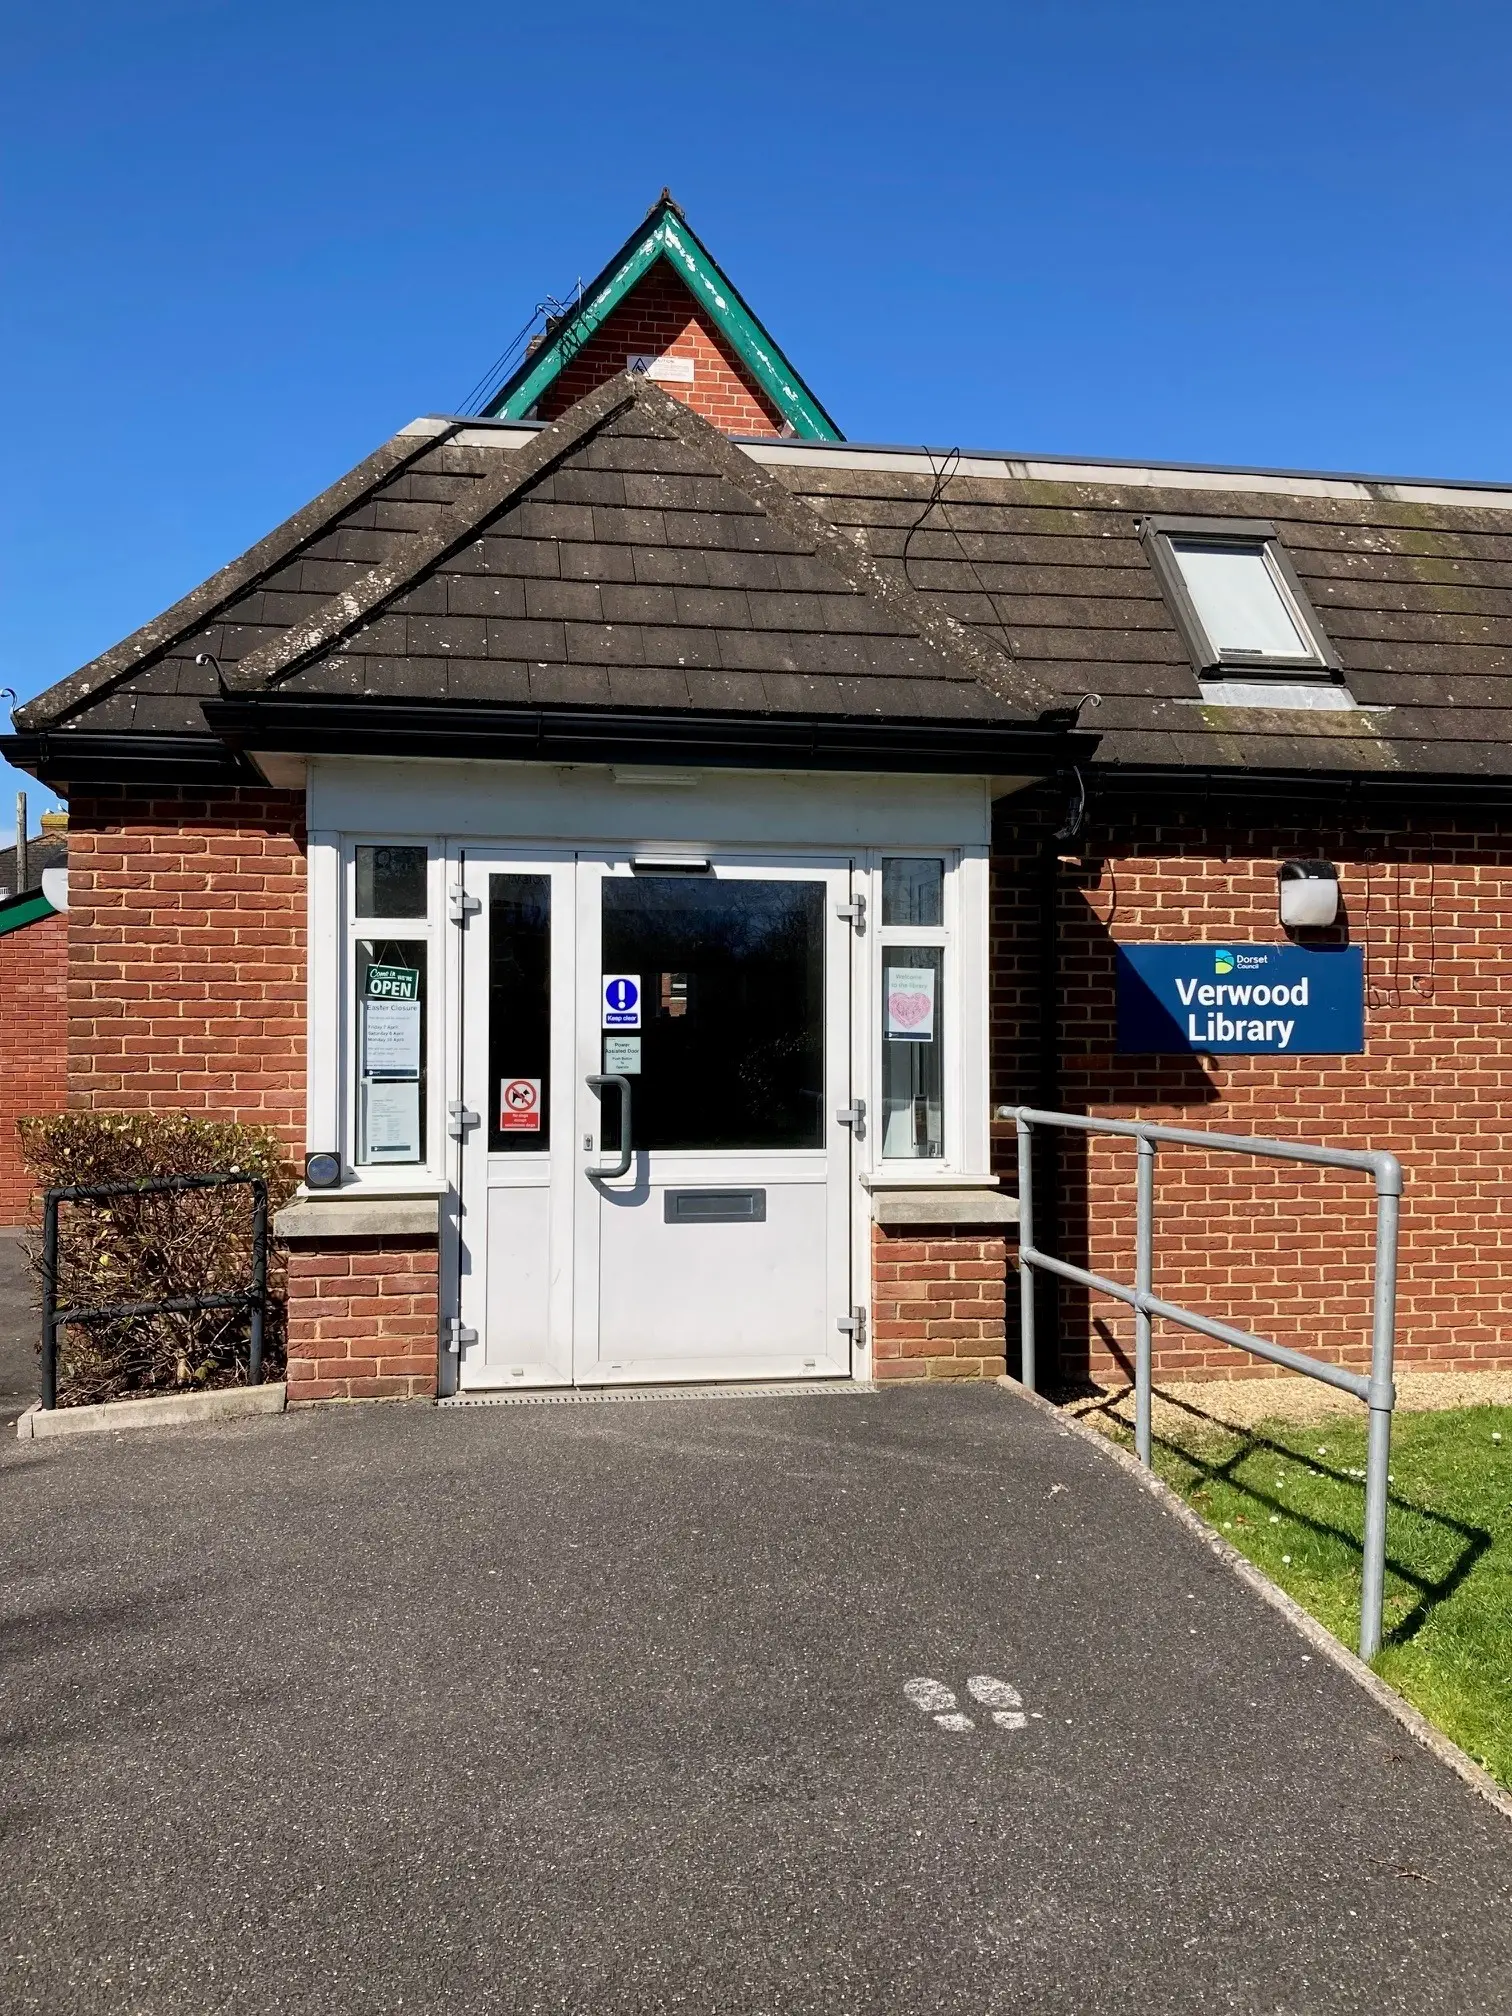 This is a picture of the entrance to Verwood Library, it has a white door with blue handle.